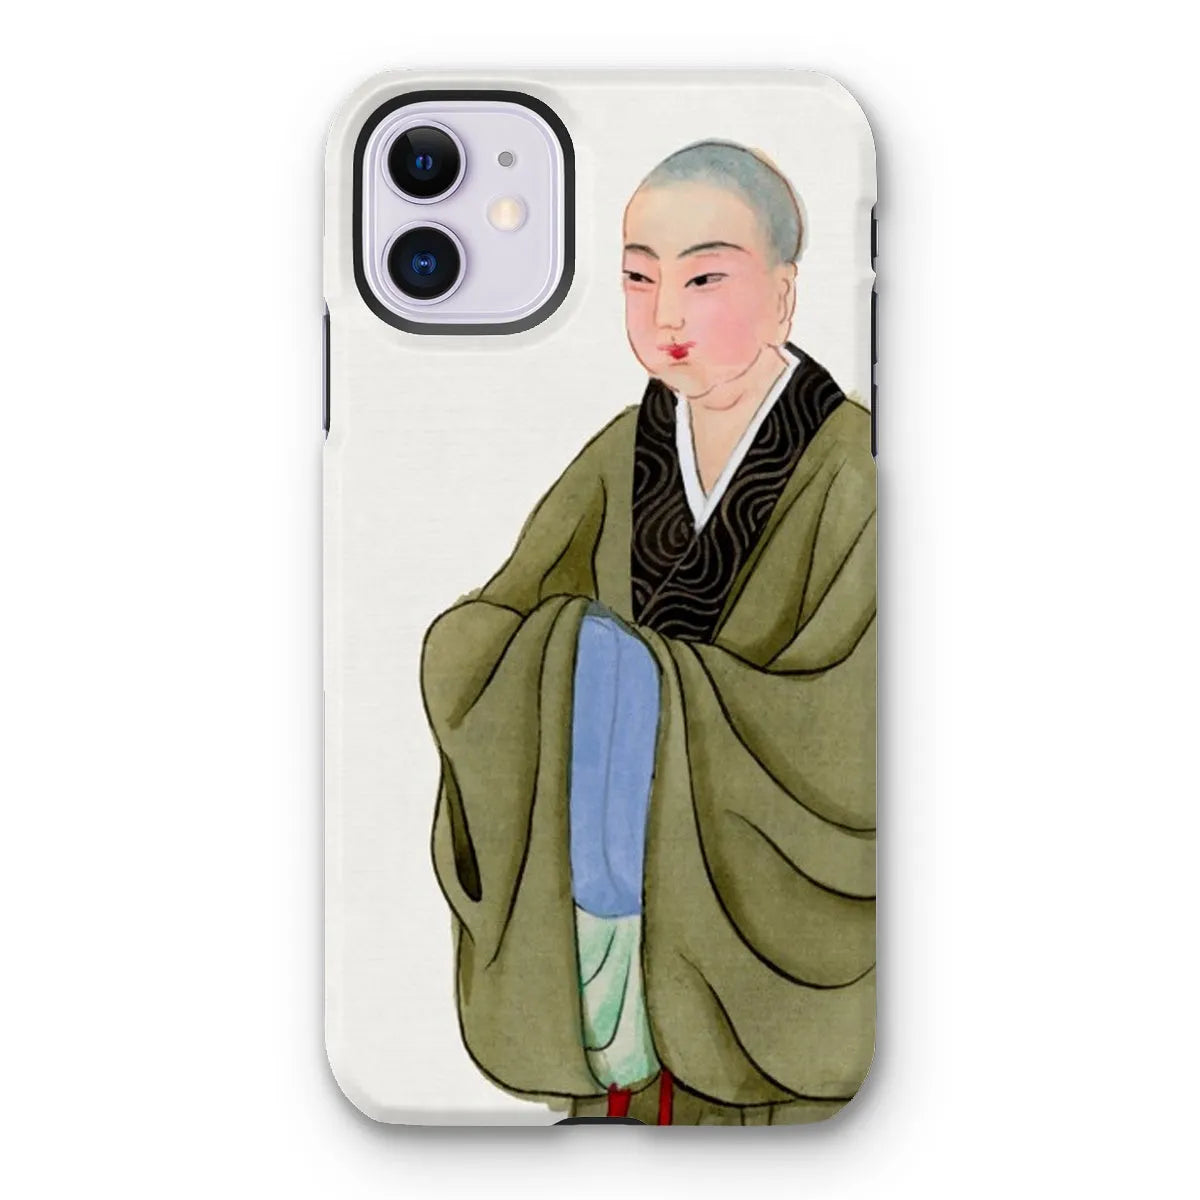 Buddhist Monk - Manchu Chinese Aesthetic Art Phone Case - Iphone 11 / Matte - Mobile Phone Cases - Aesthetic Art